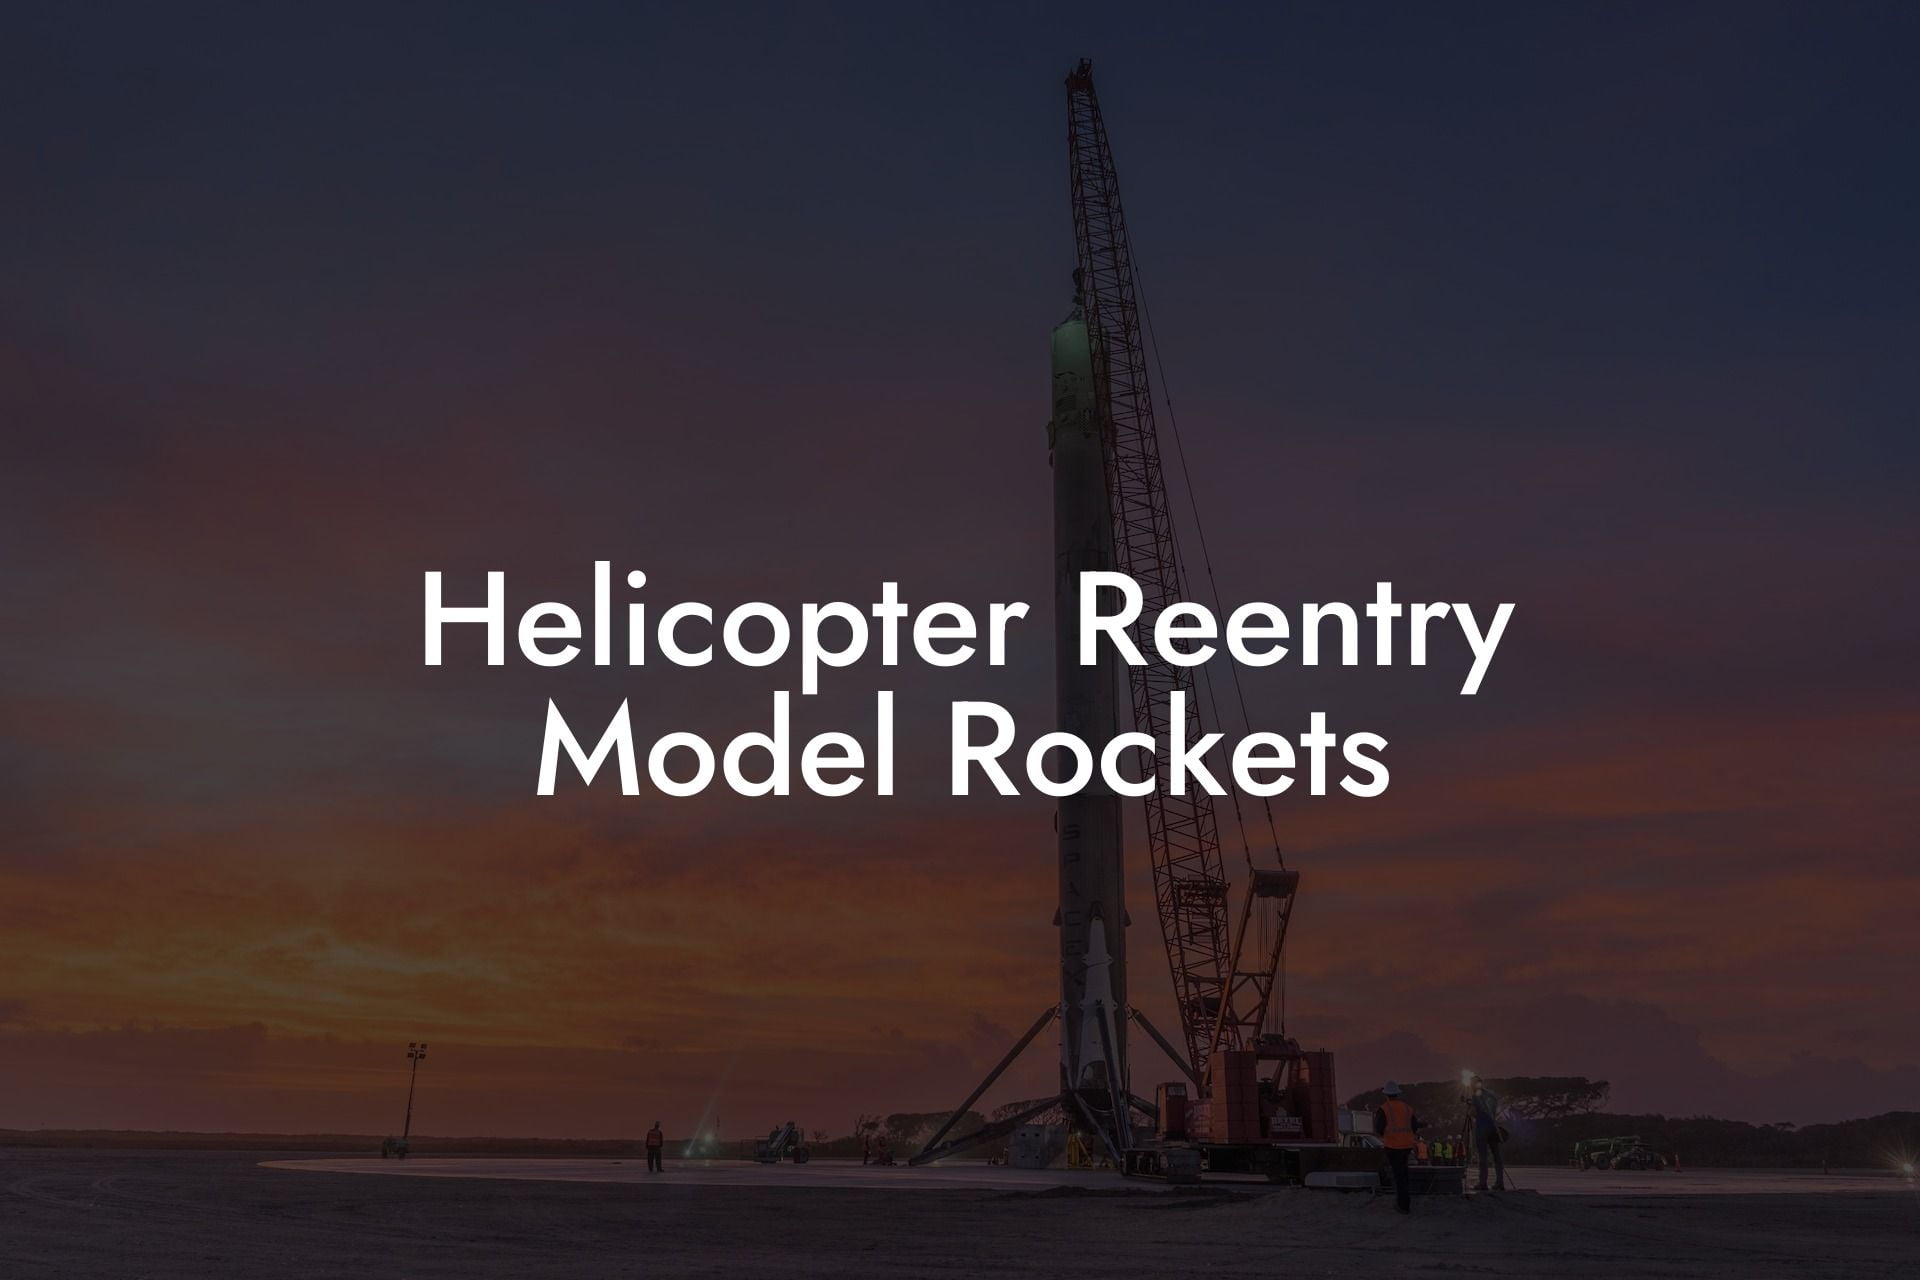 Helicopter Reentry Model Rockets